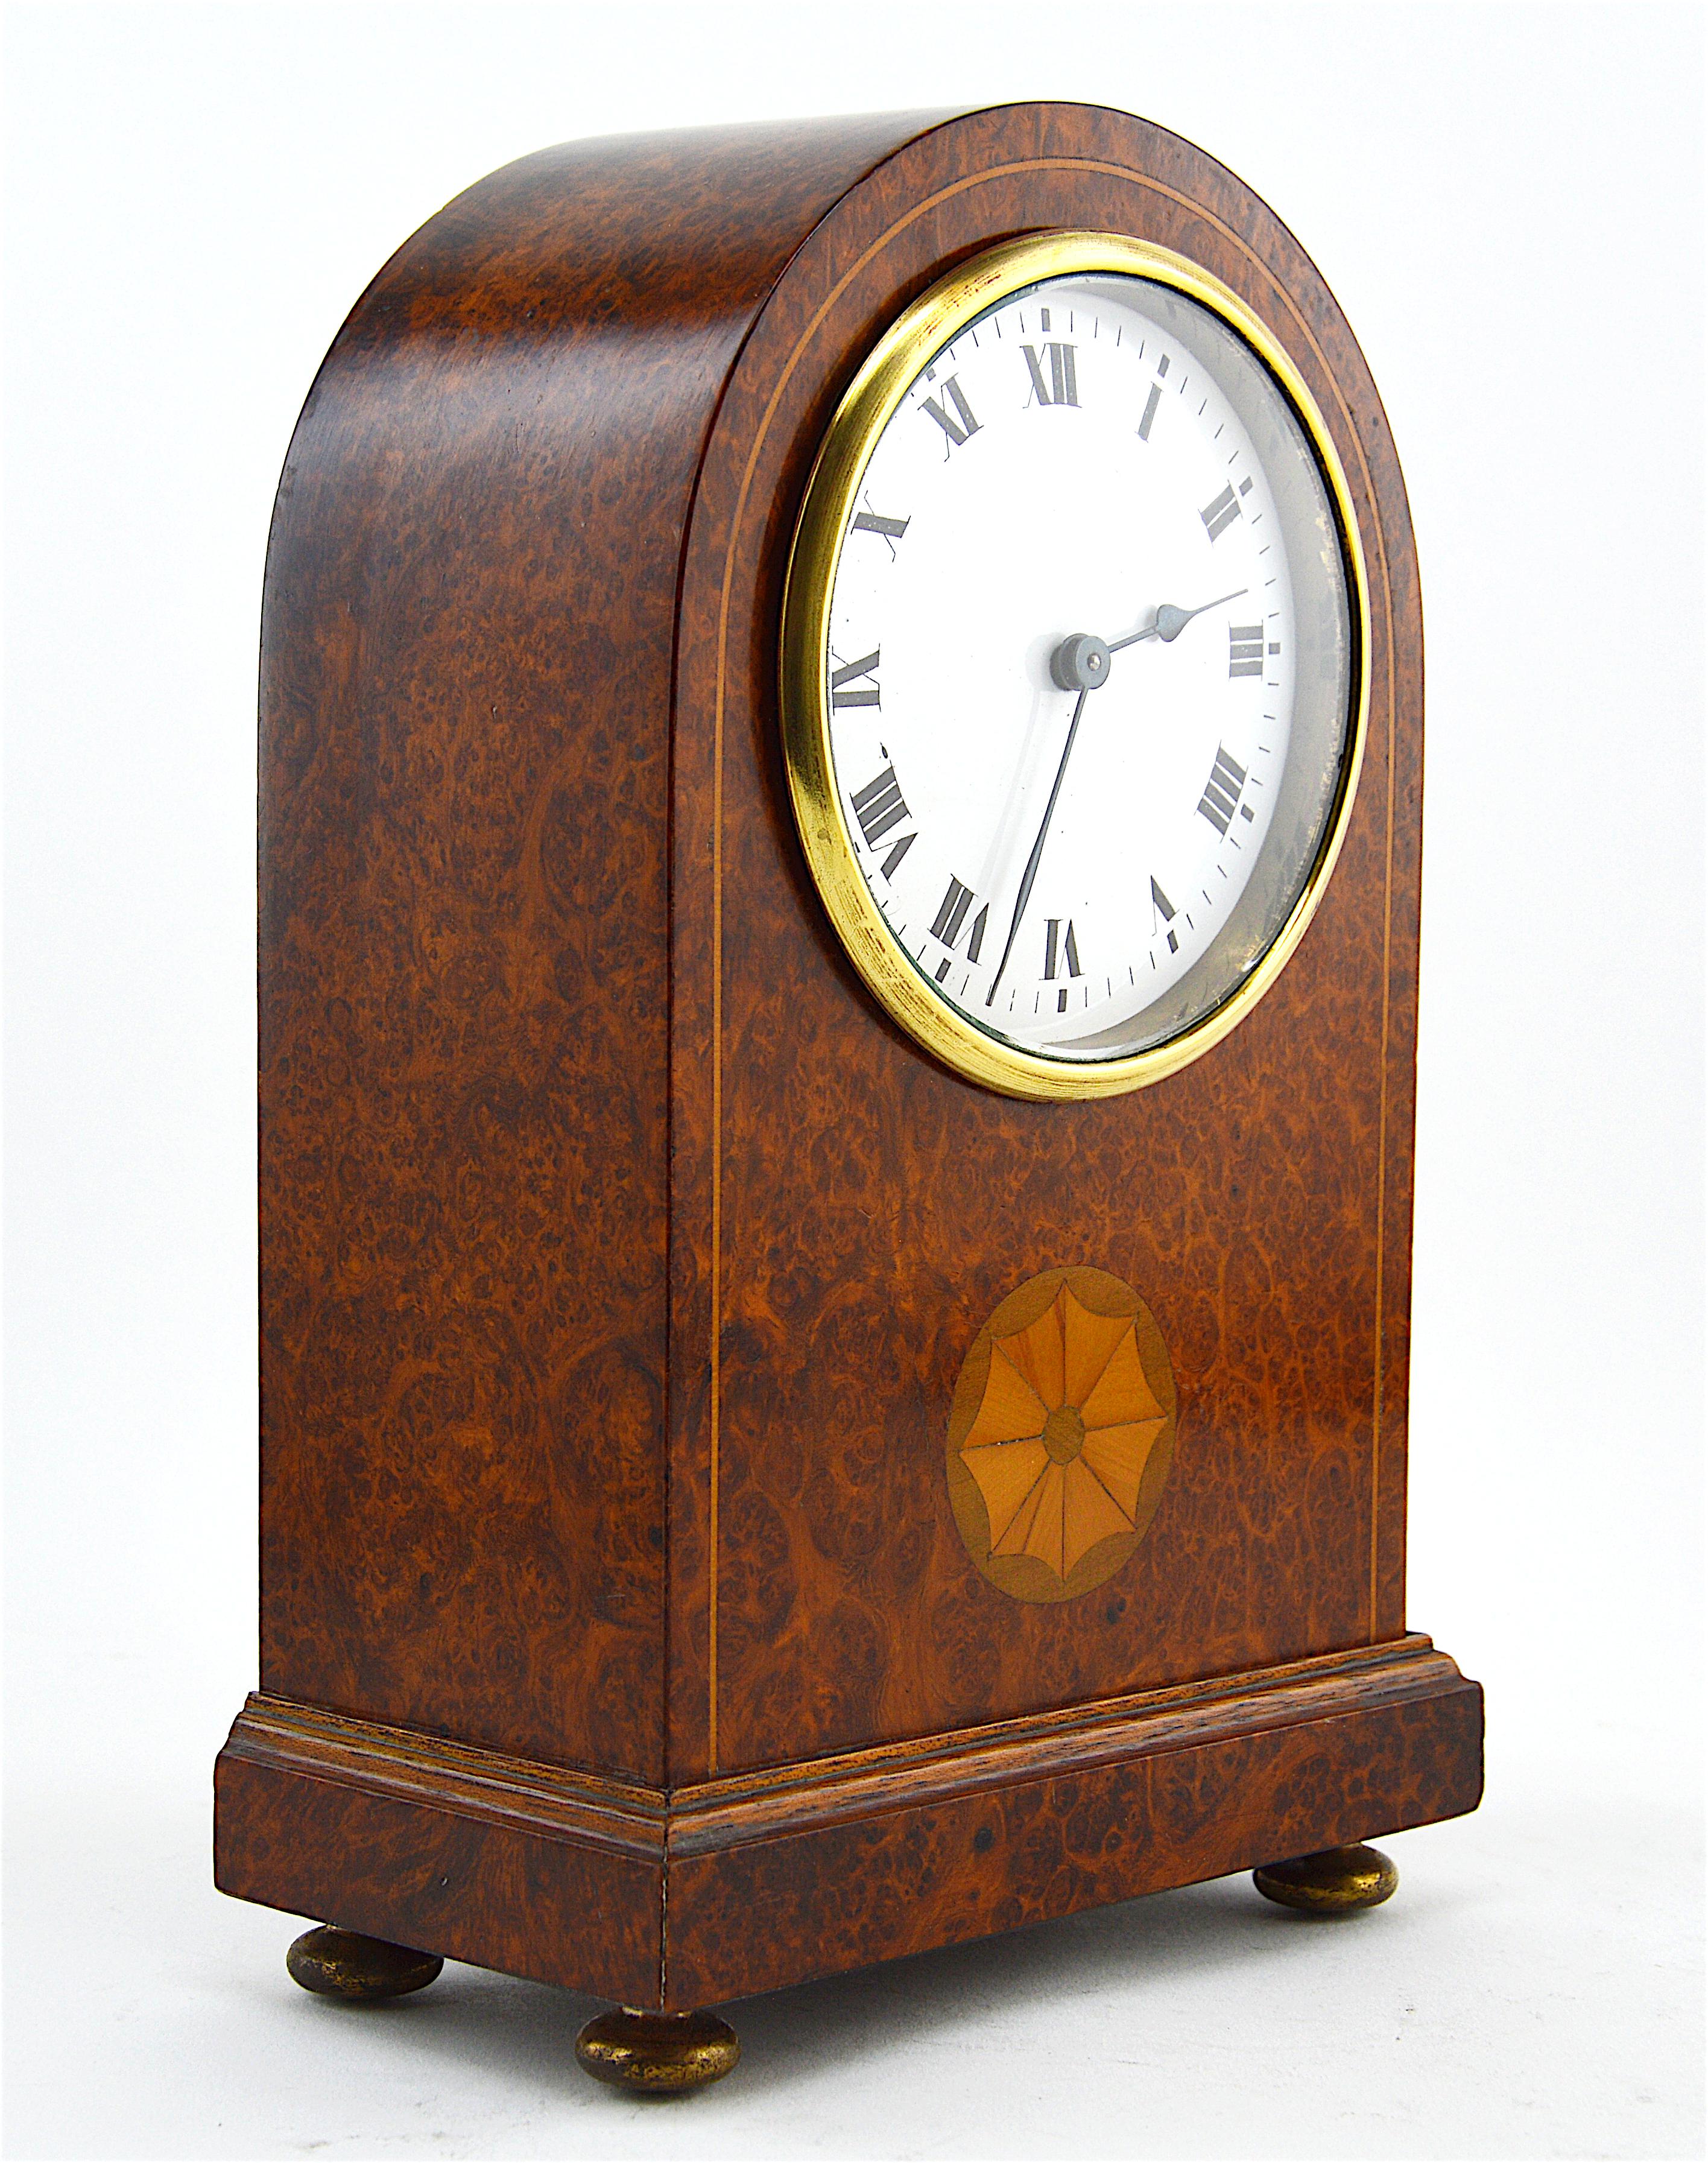 French Art Deco table clock in the style of Sue & Mare, France, 1920s. Inlaid amboyna veneered. Measures: Height 8.4